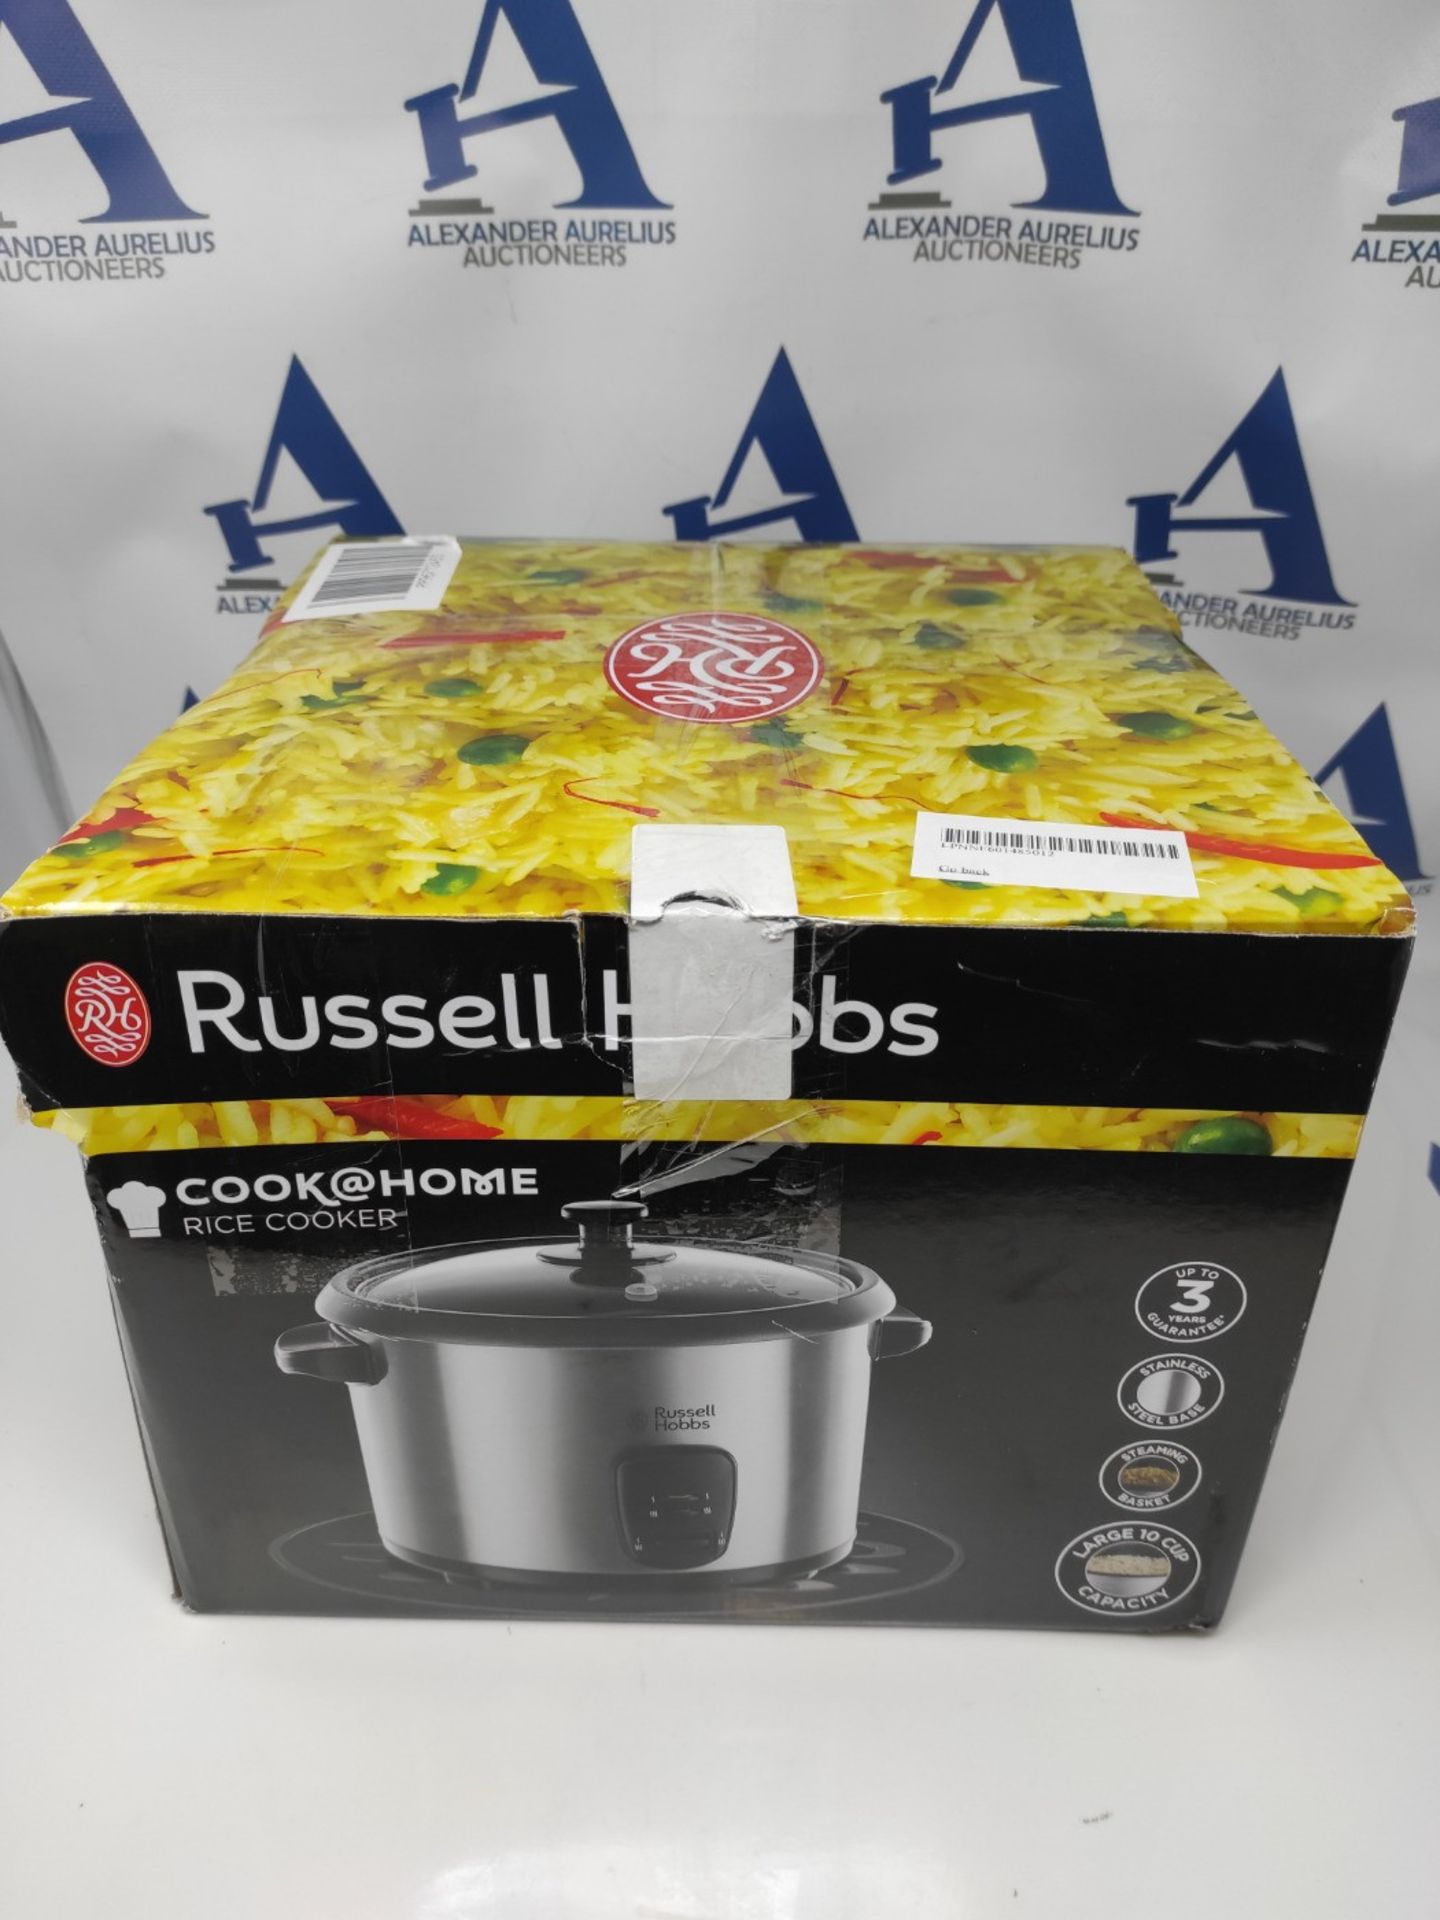 Russell Hobbs Electric Rice Cooker & Steamer - 1.8L (10 cup) Keep warm function, Remov - Image 2 of 3